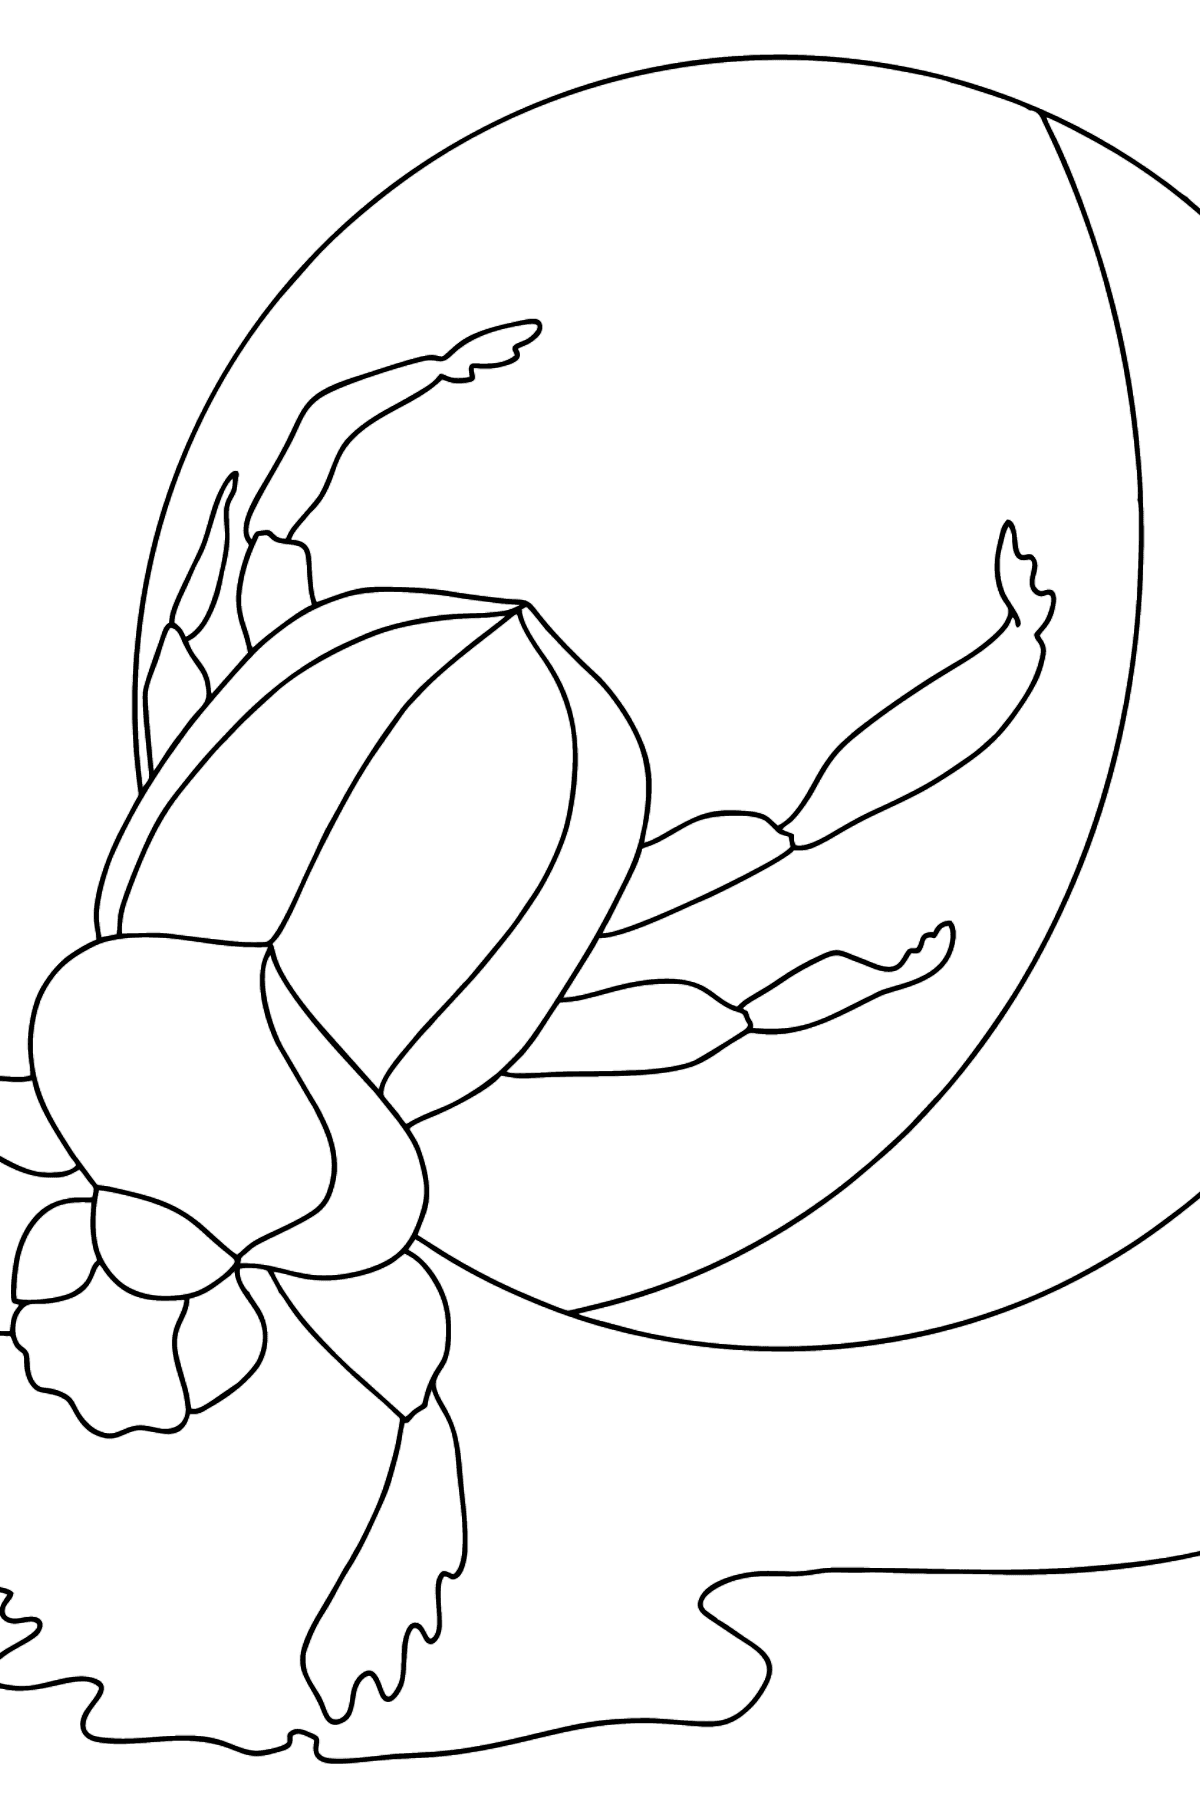 Coloring Page - A Scarab Beetle or a Symbol of Renewal - Coloring Pages for Kids